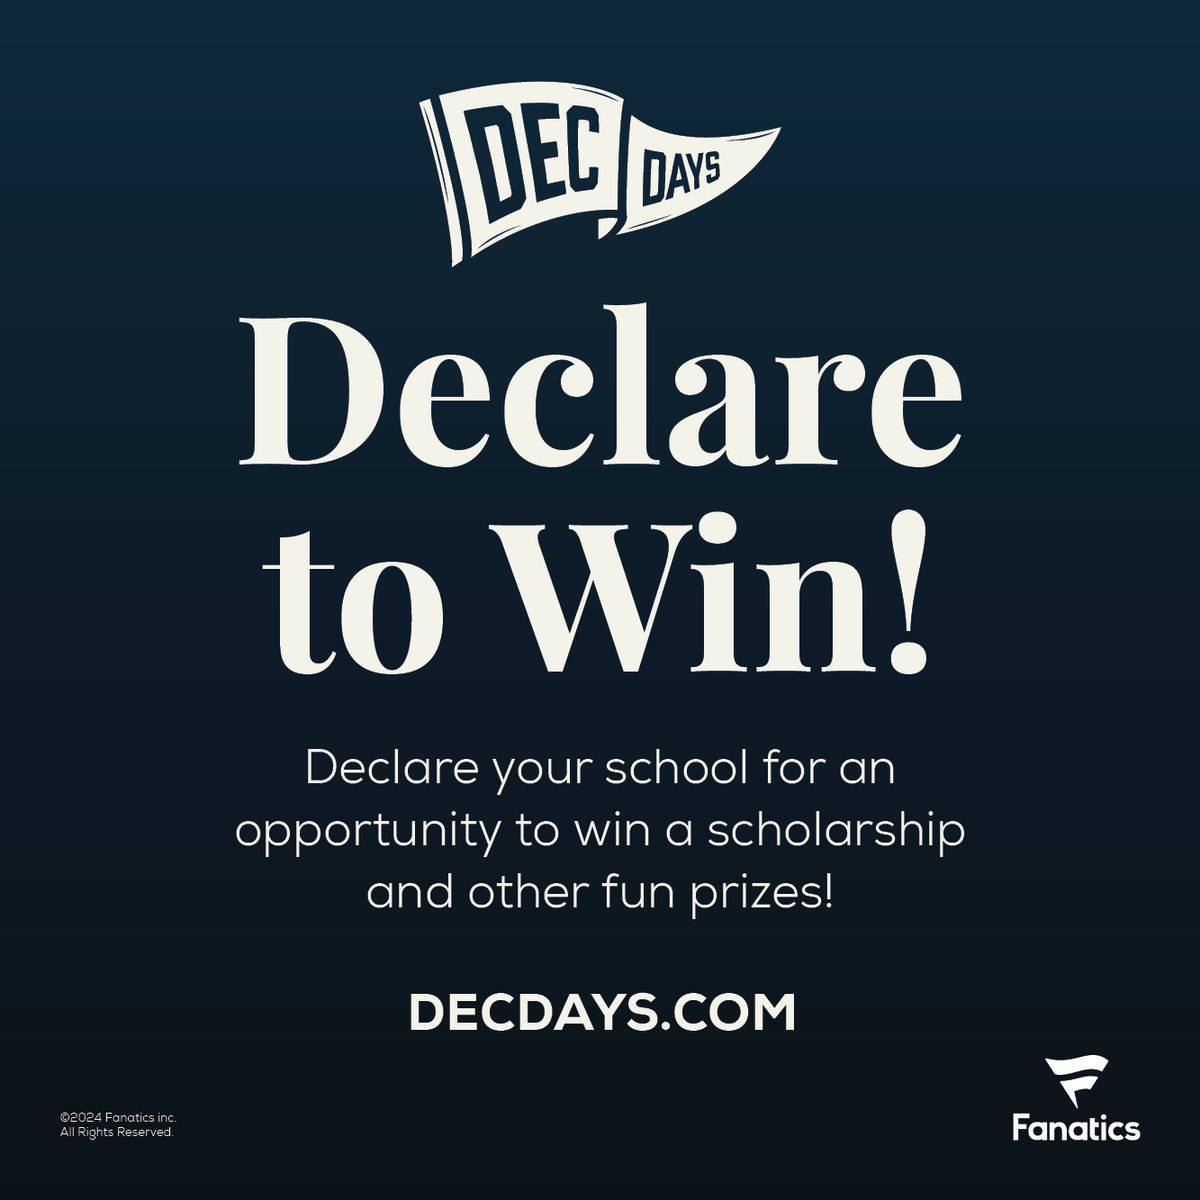 Class of 2028! Want to win a $2,500, $5,000 or even a $10,000 scholarship?! Enter to win by publicly declaring your decision to attend by visiting decdays.com by May 1! #UR2028 @Fanatics